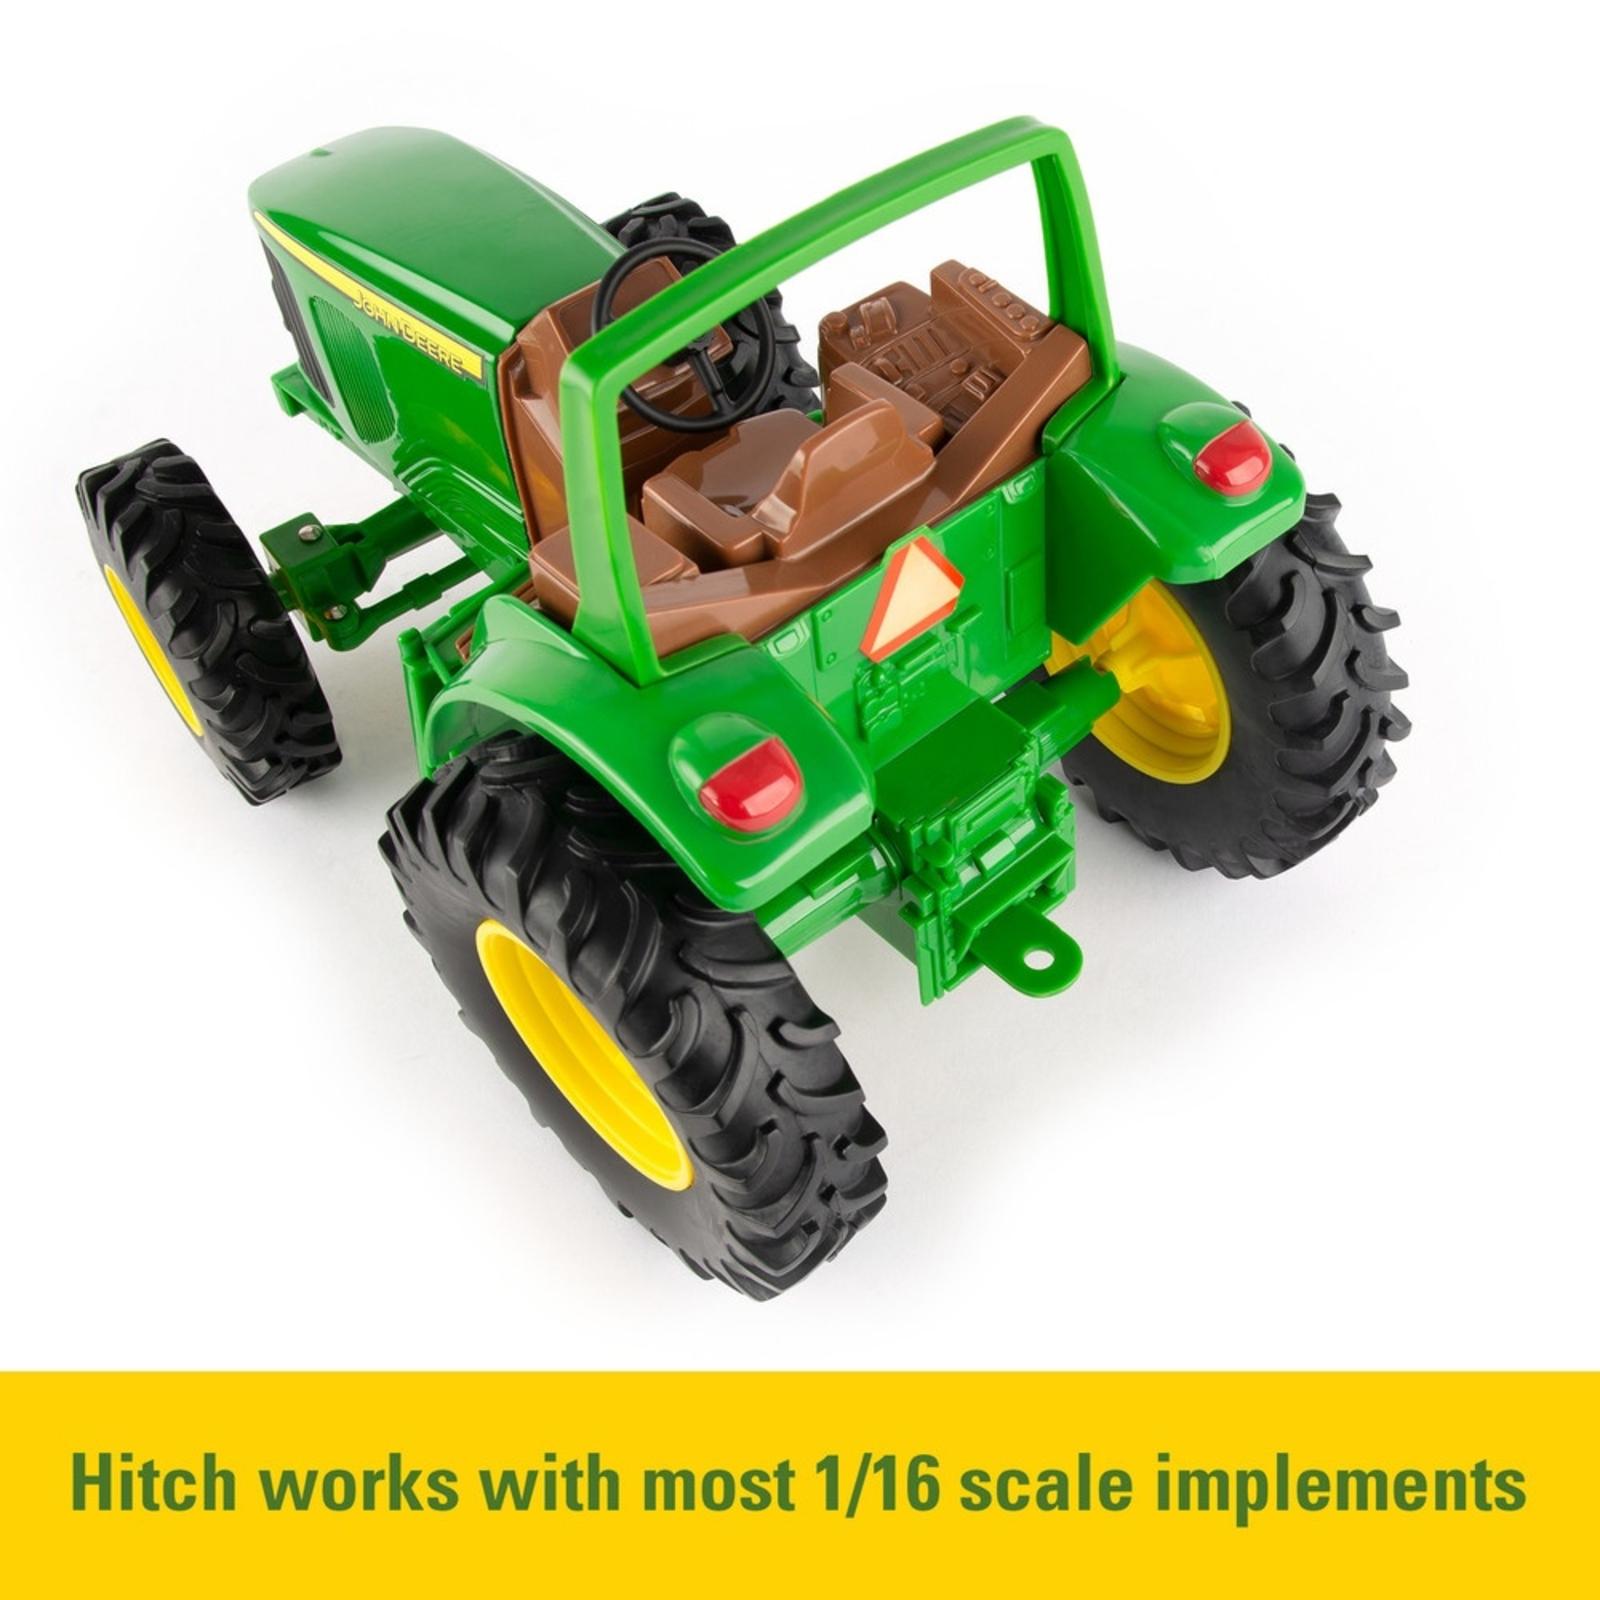 hitch works with most 1/16 scale implements